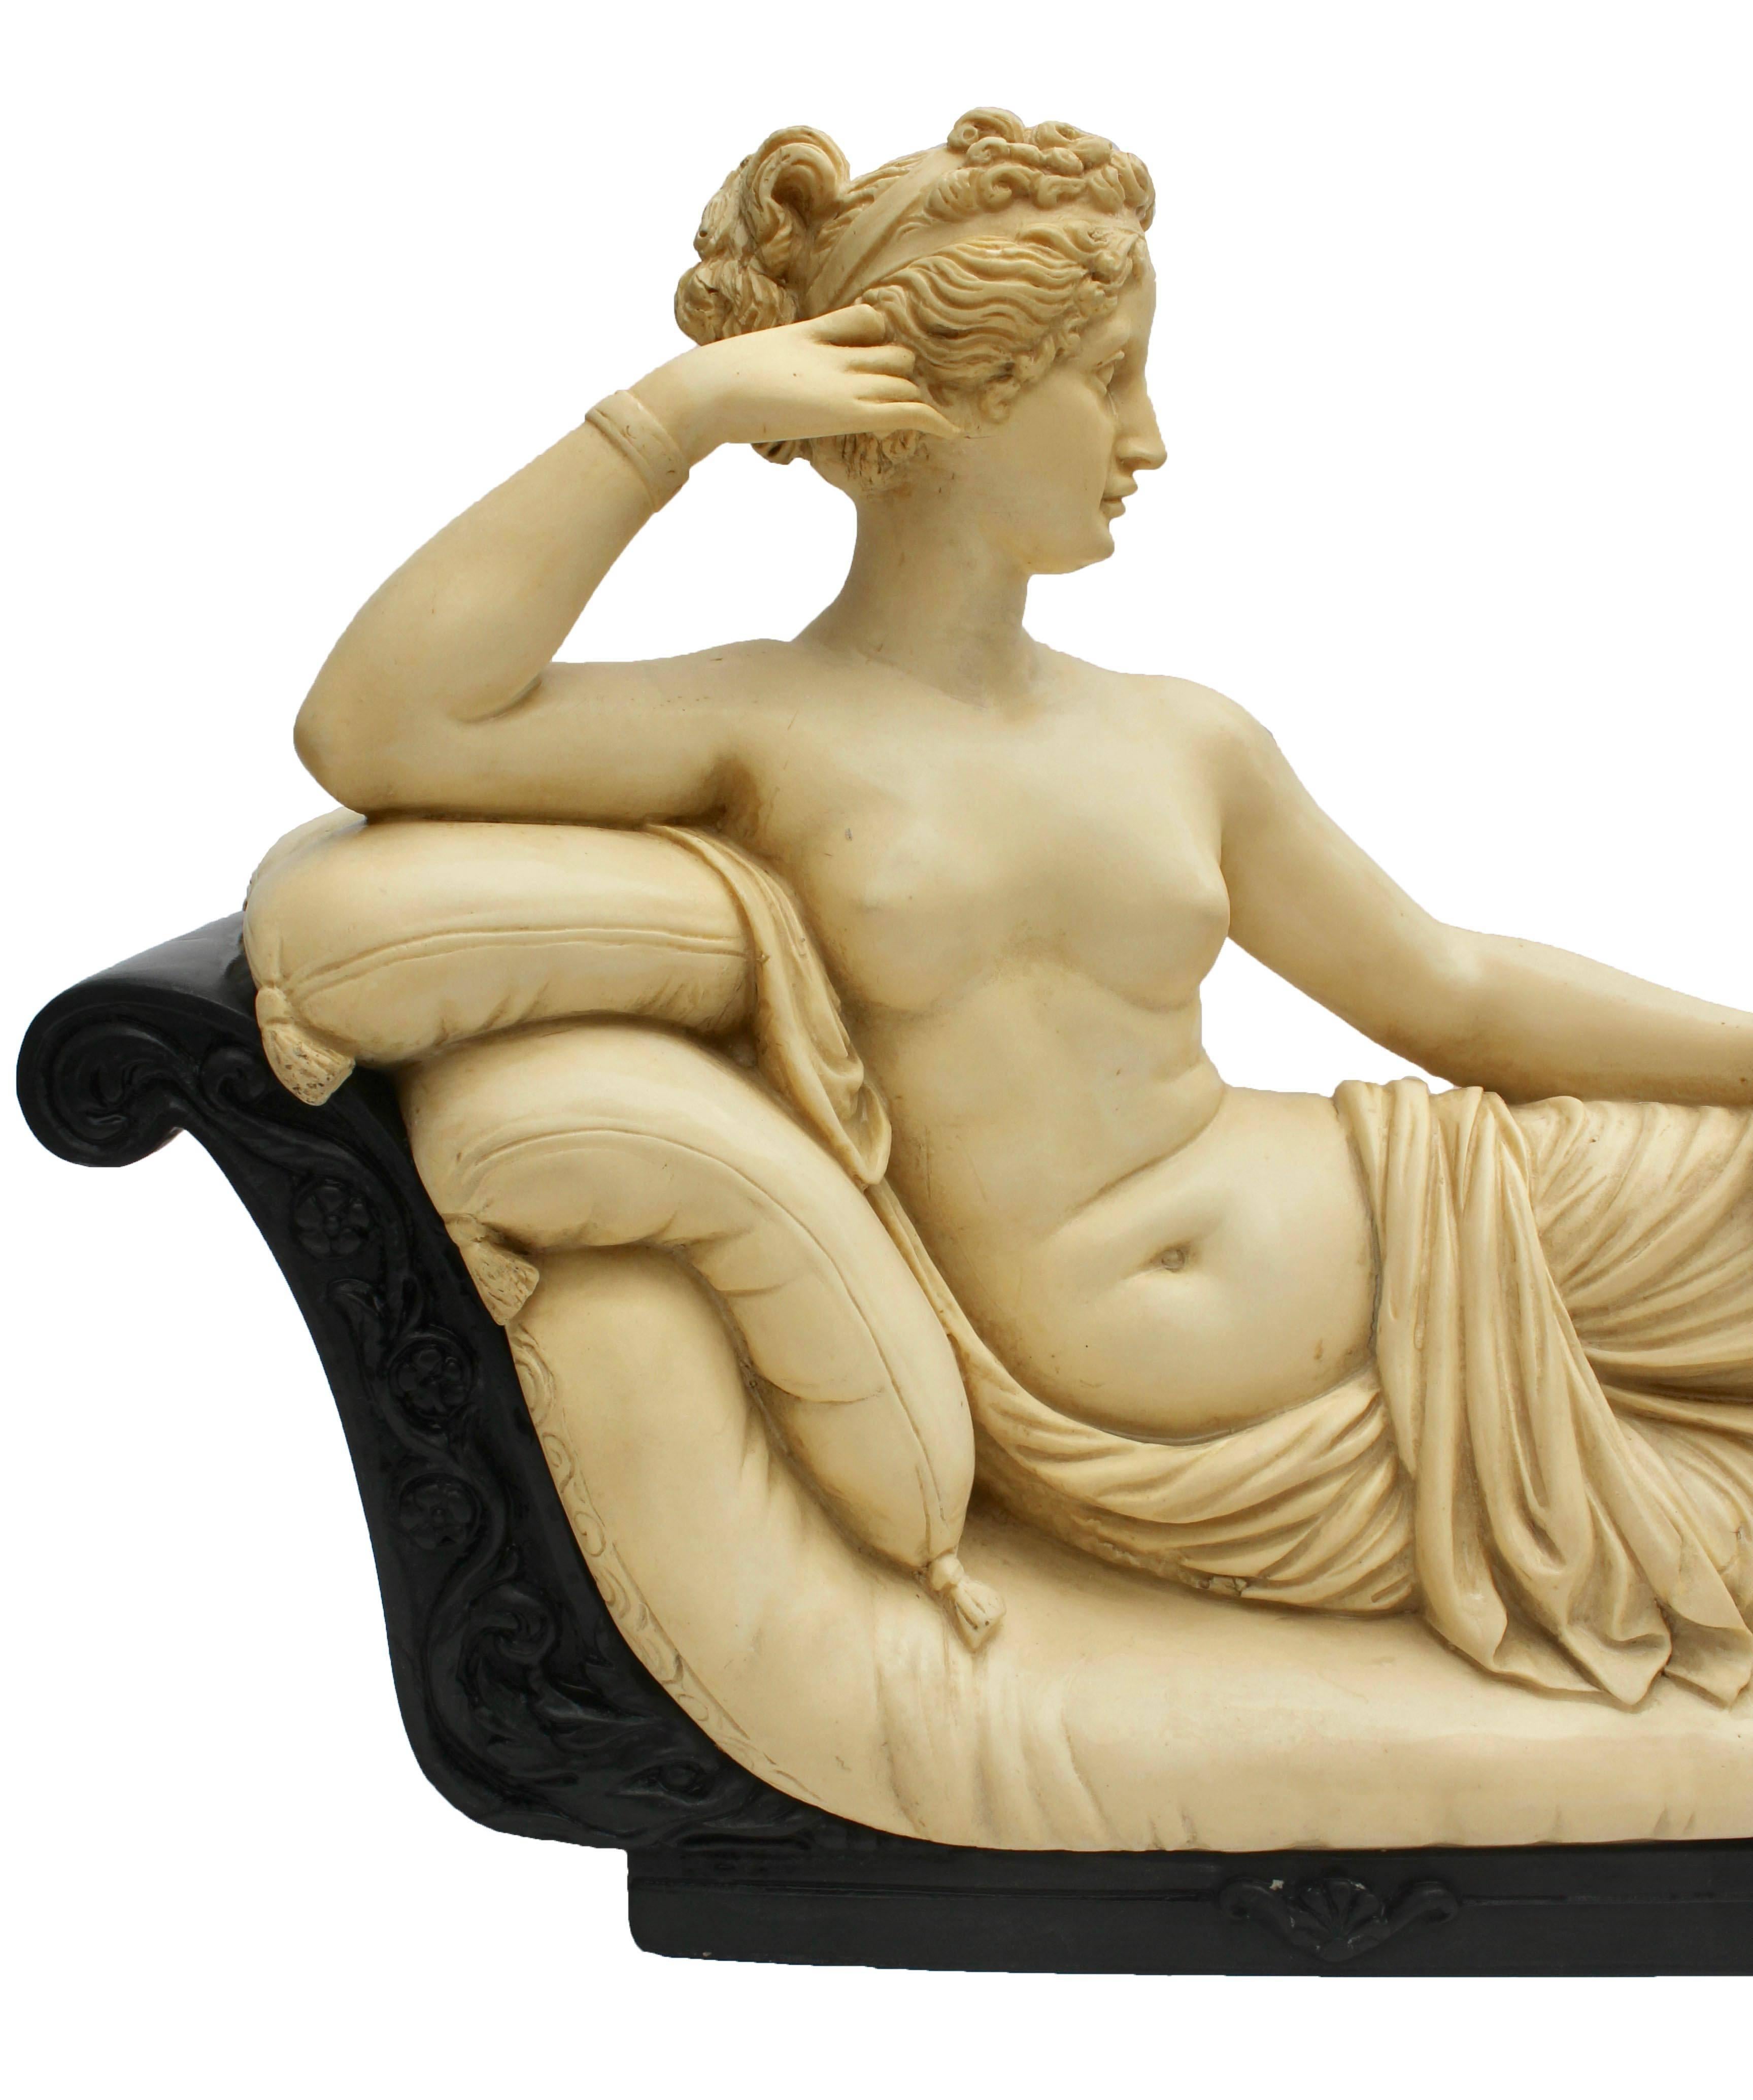 1975, Italy in good condition

Beautifully detailed and stylized image of Venus Victus to Canova, drawn by G. Ruggeri.
Made from a combination of resin or Alabaster.
The image is in good condition with a nice age patina. 

Gino Ruggeri, one of